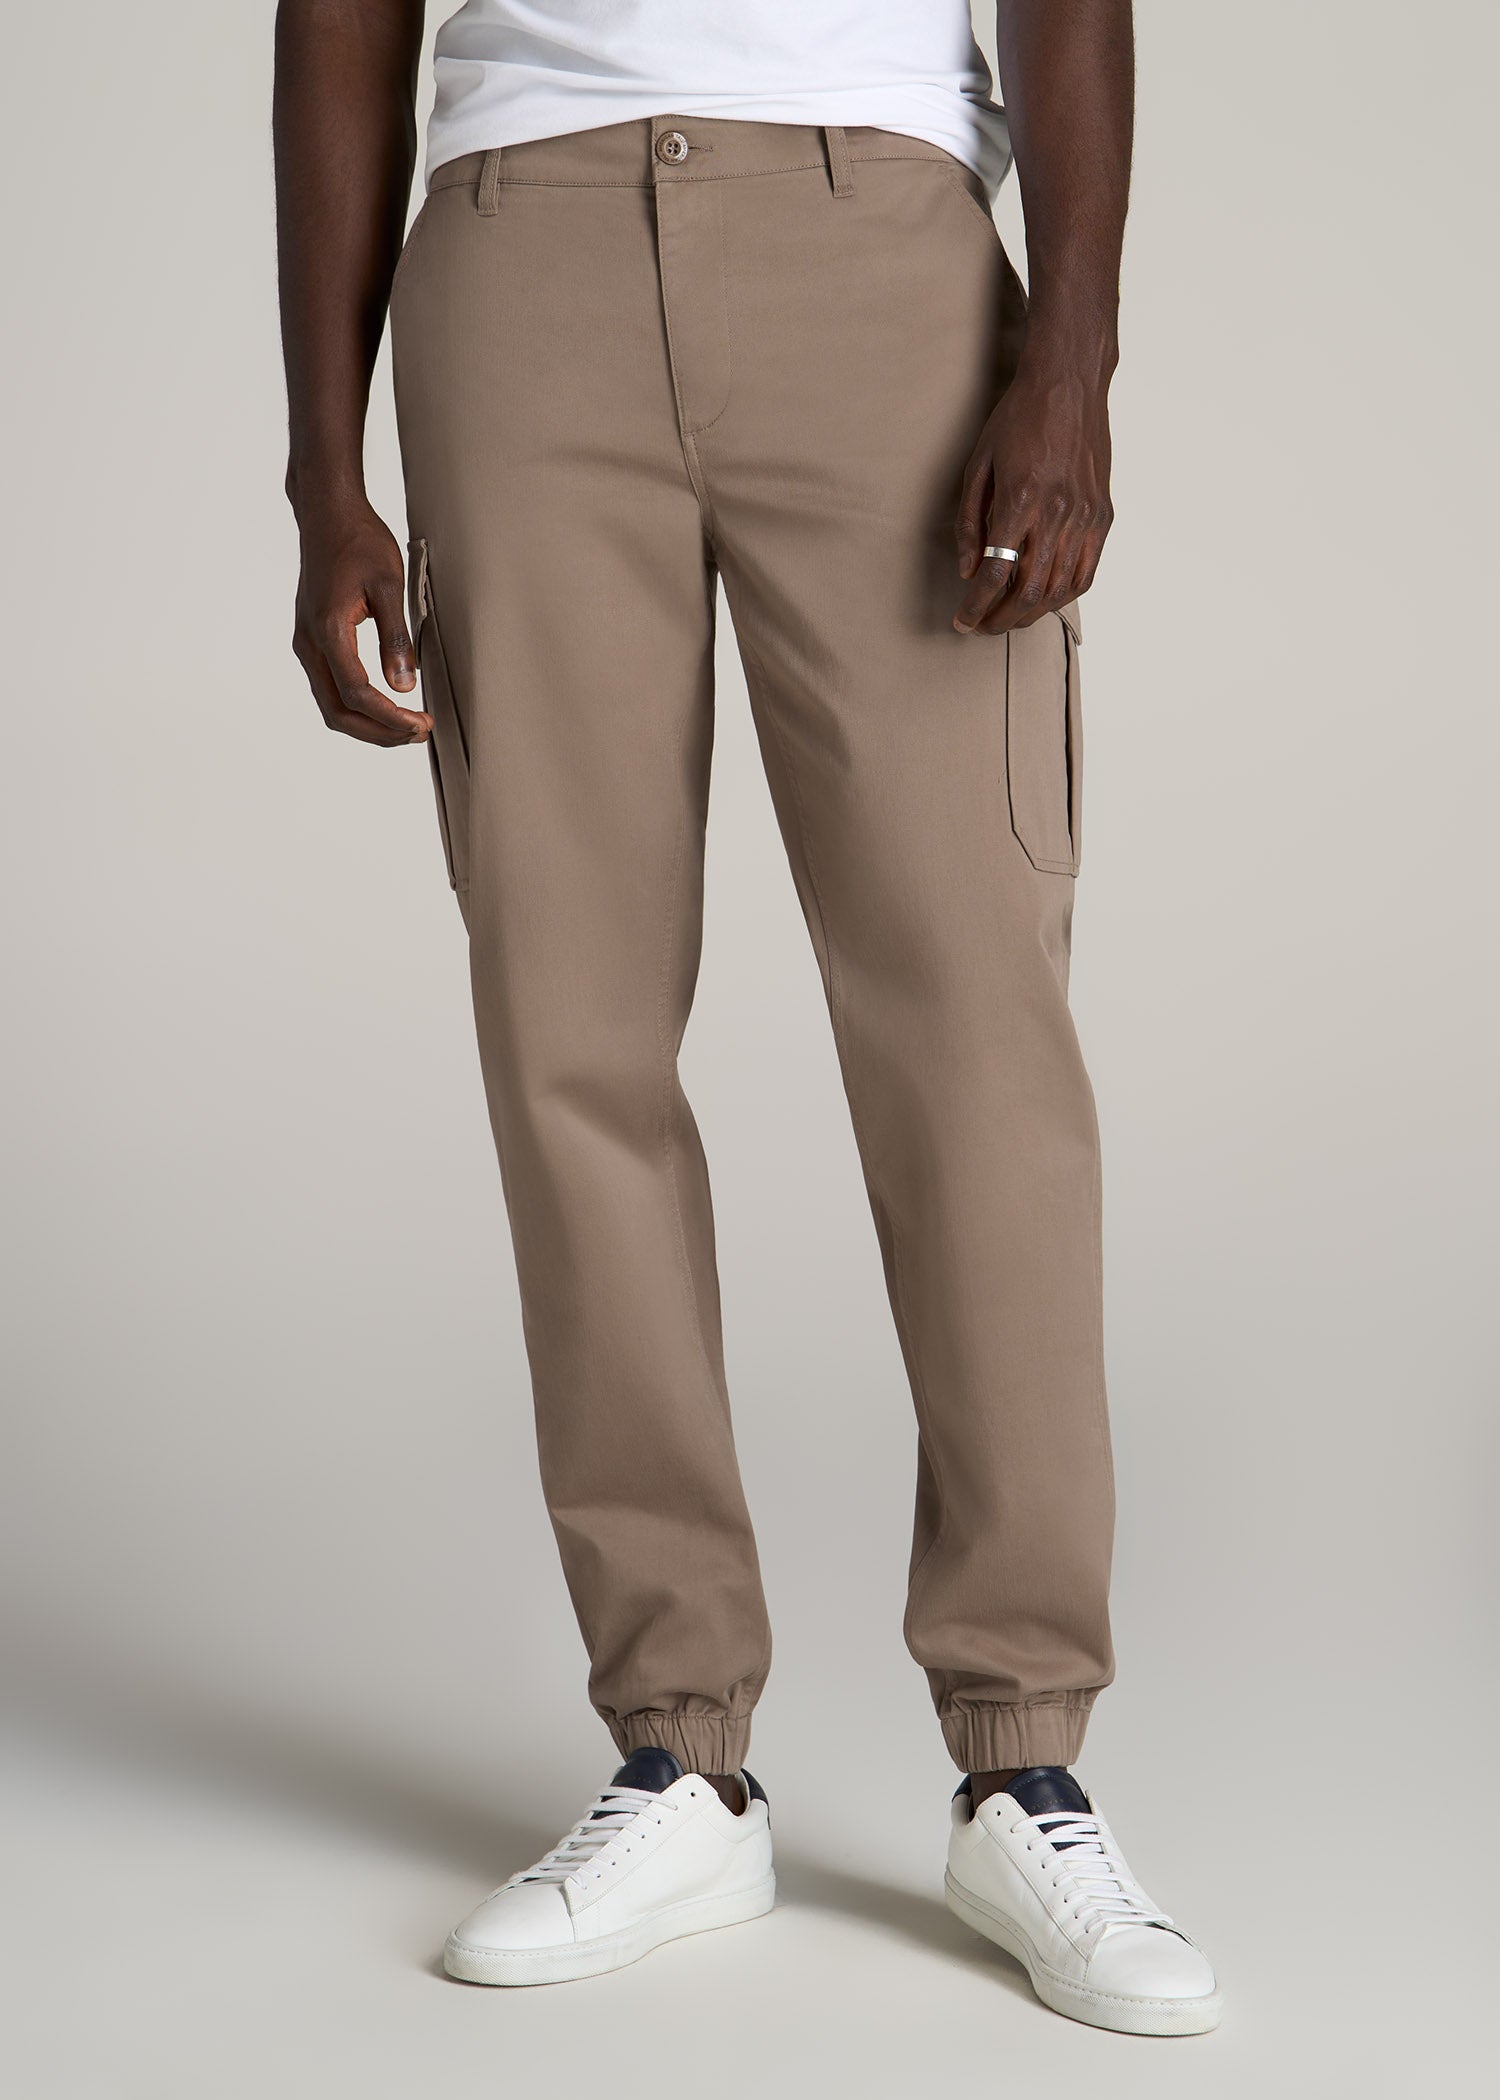 Tapered-Fit Stretch Cotton Cargo Jogger Pants for Tall Men in Dark Sand 38 / Extra Tall / Dark Sand